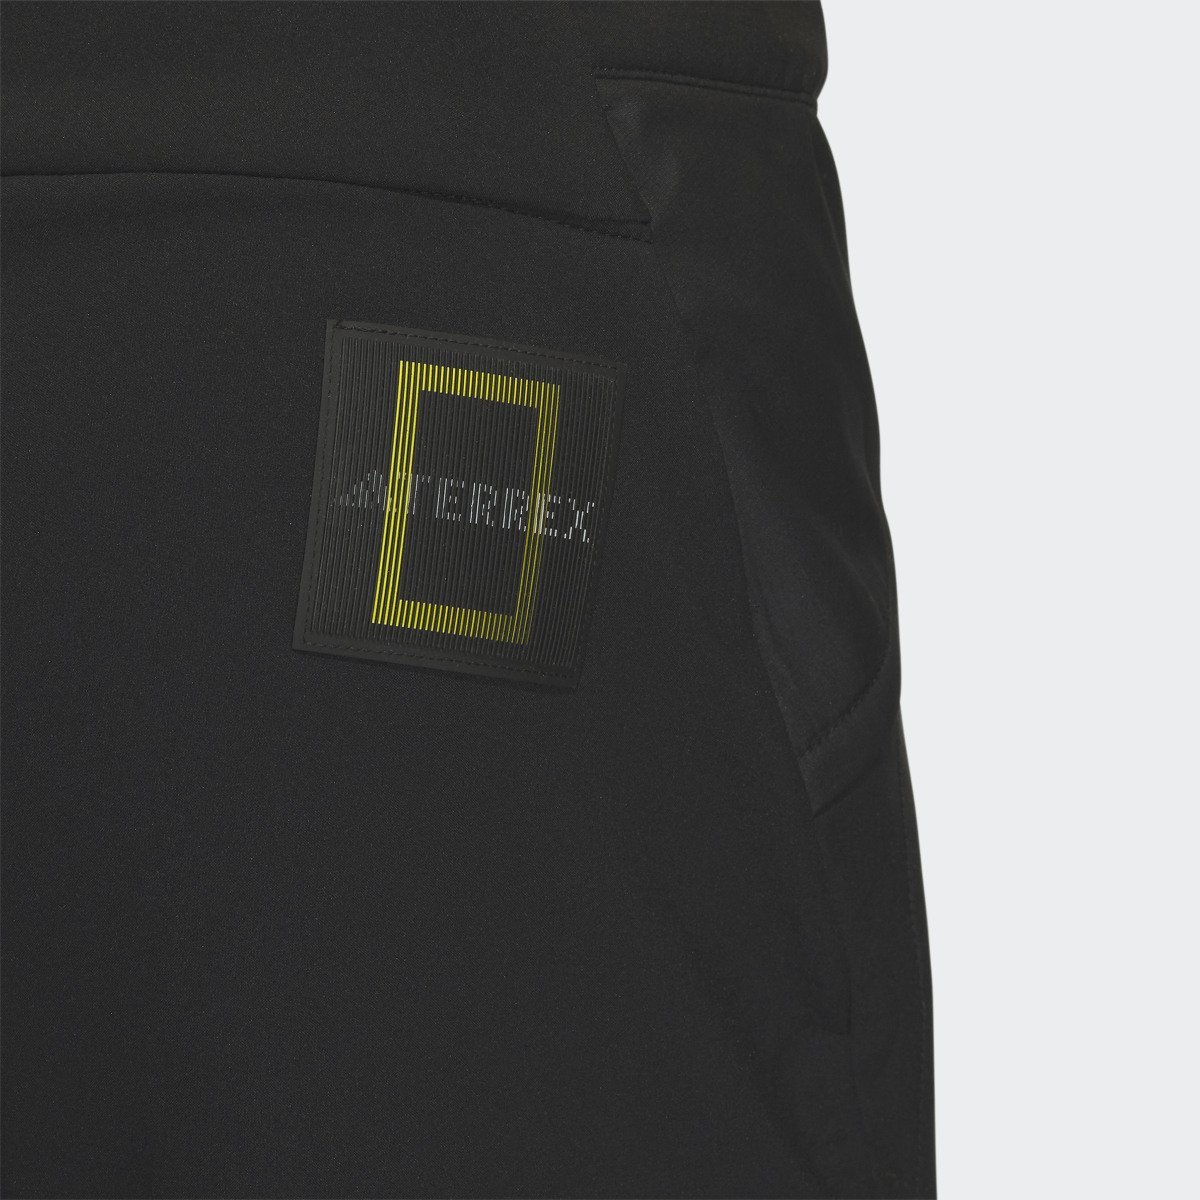 Adidas Pants National Geographic Soft Shell. 6